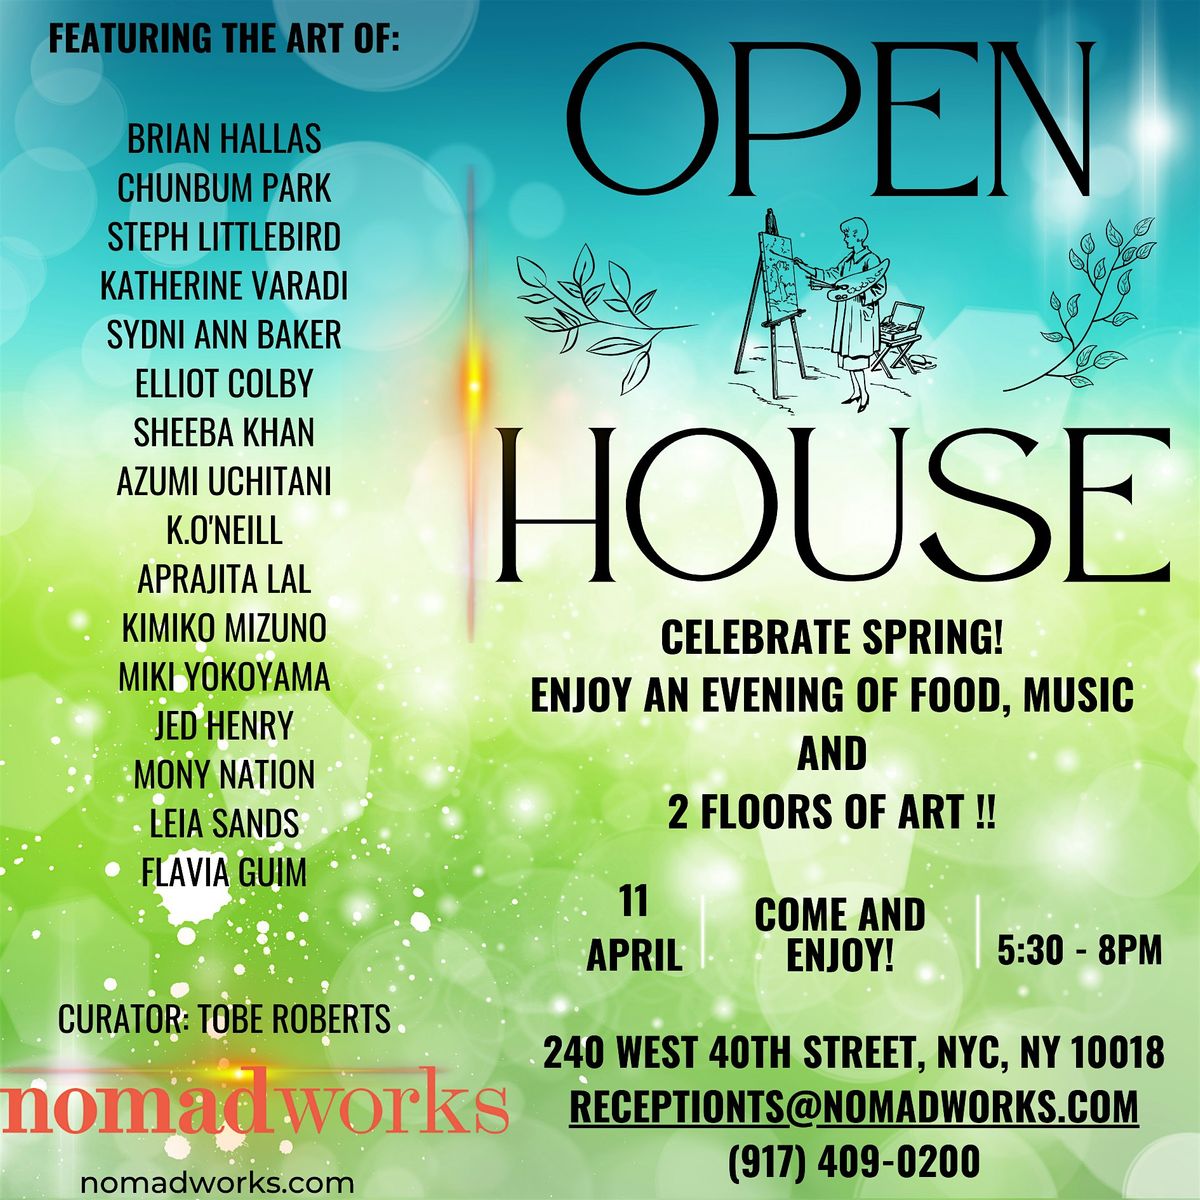 Nomadworks Times Square Spring Art Open House!